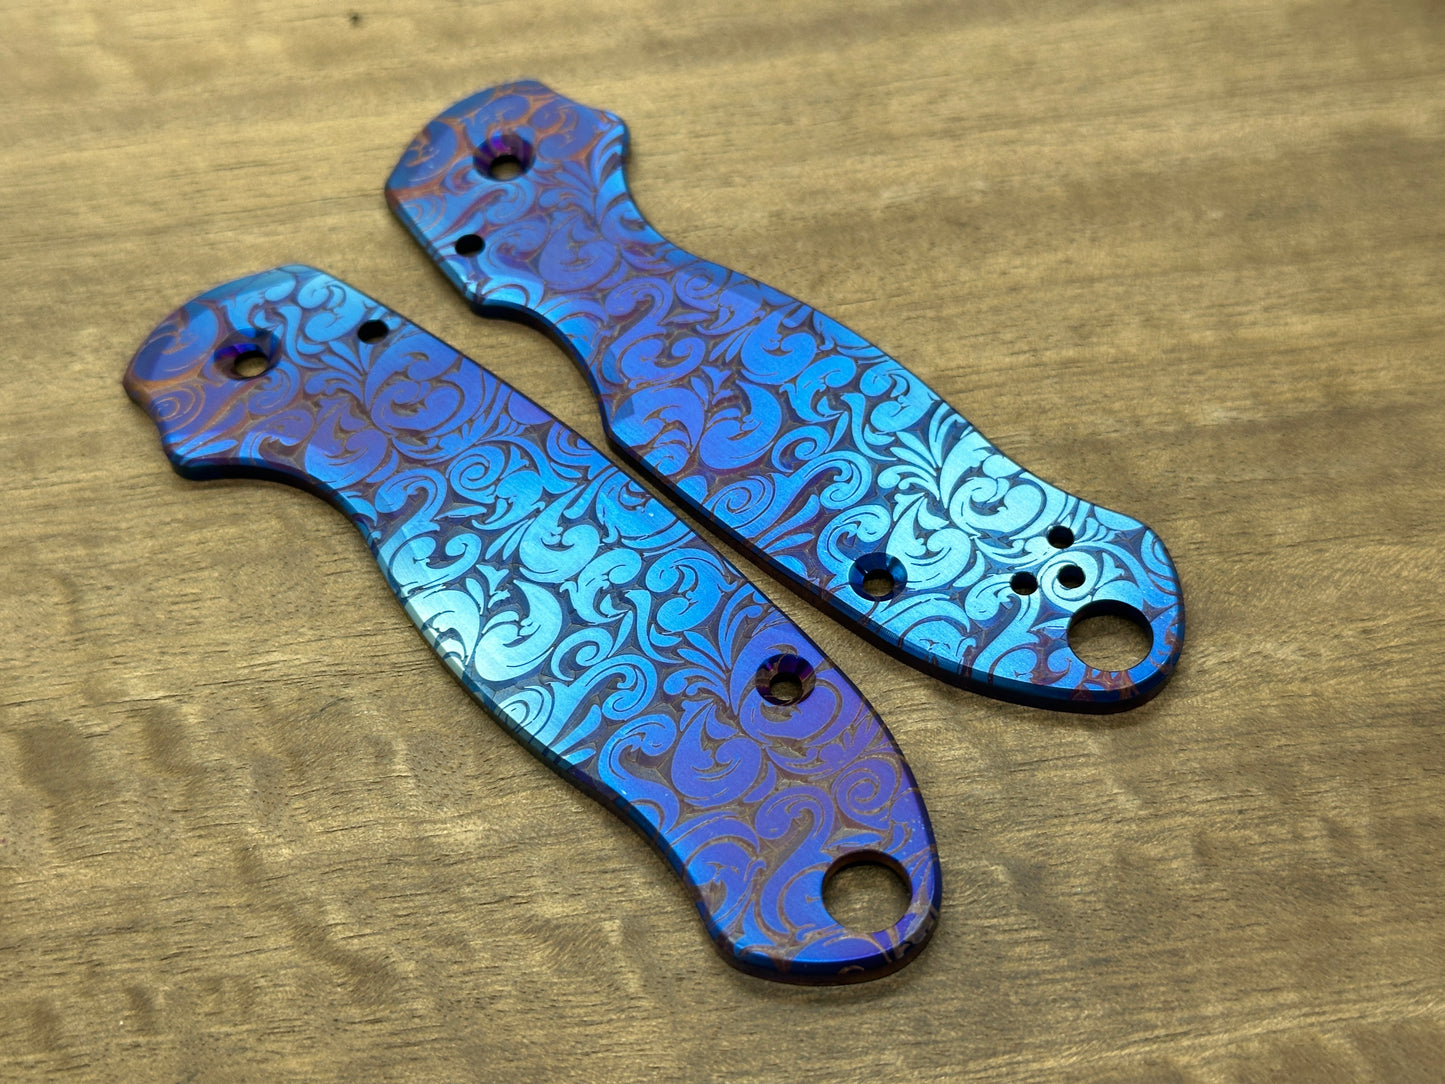 Flamed VICTORIA engraved Titanium Scales for Spyderco Para 3